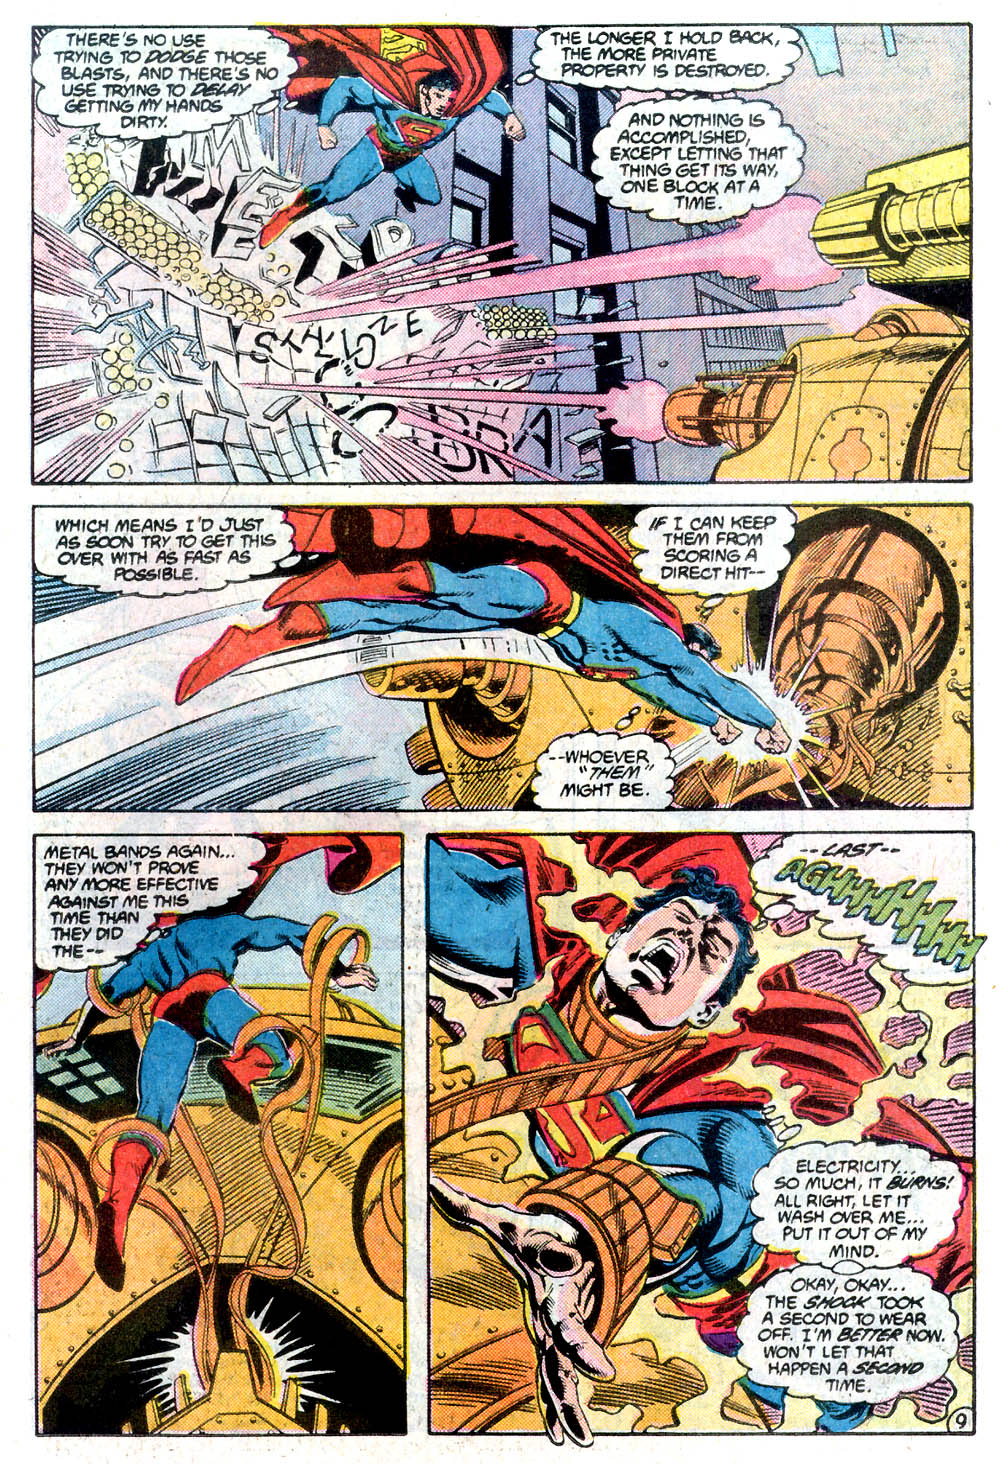 Adventures of Superman (1987) 425 Page 9